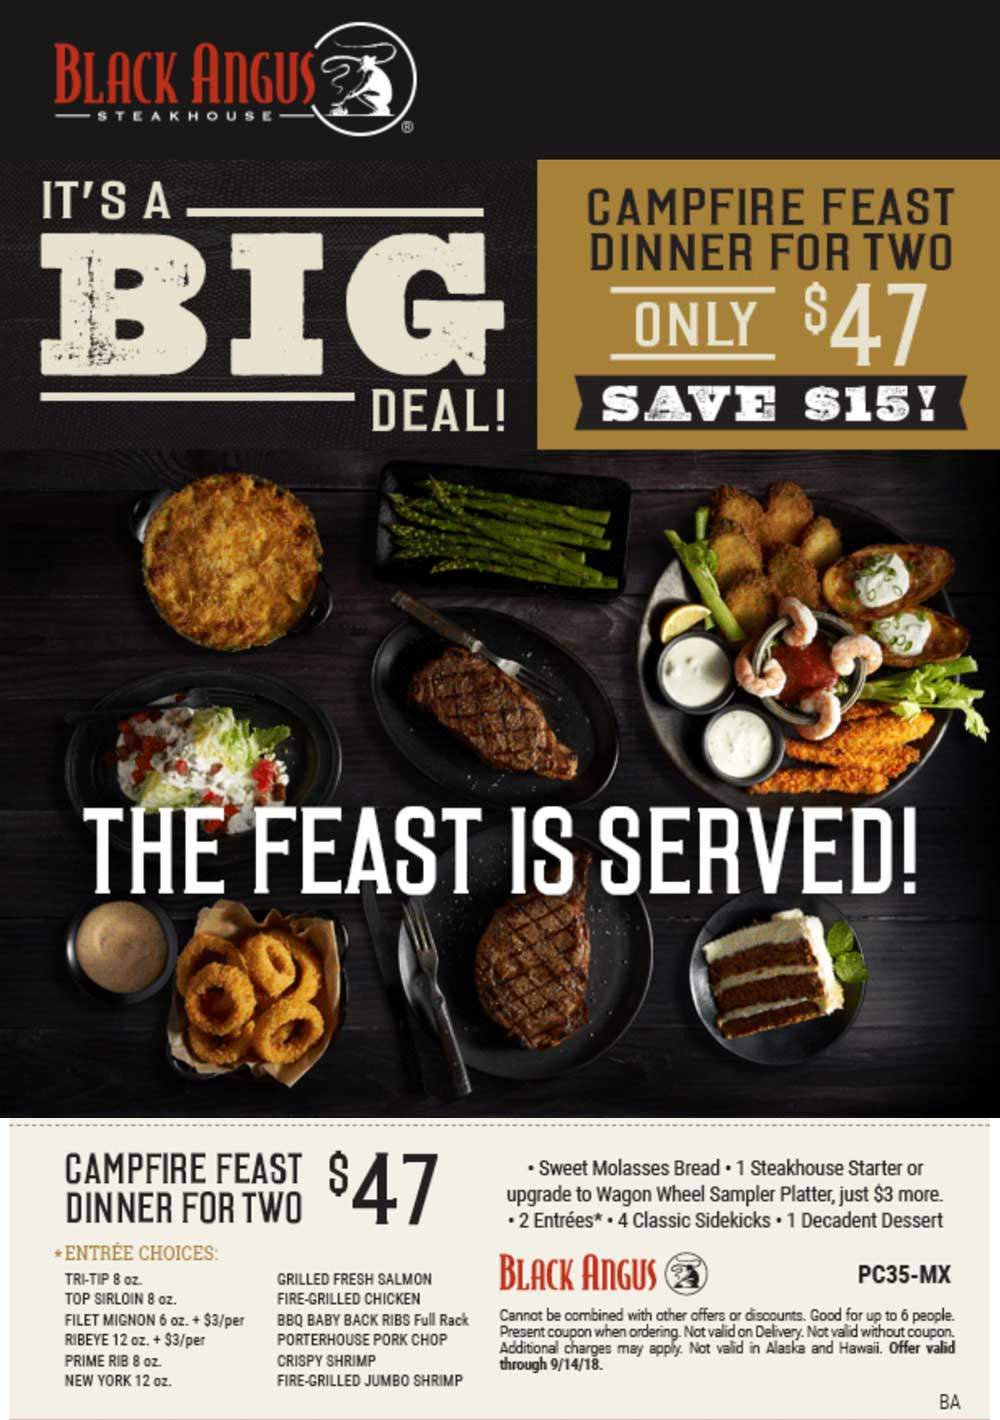 2023 Printable Coupon Black Angus Campfire Feast Deal